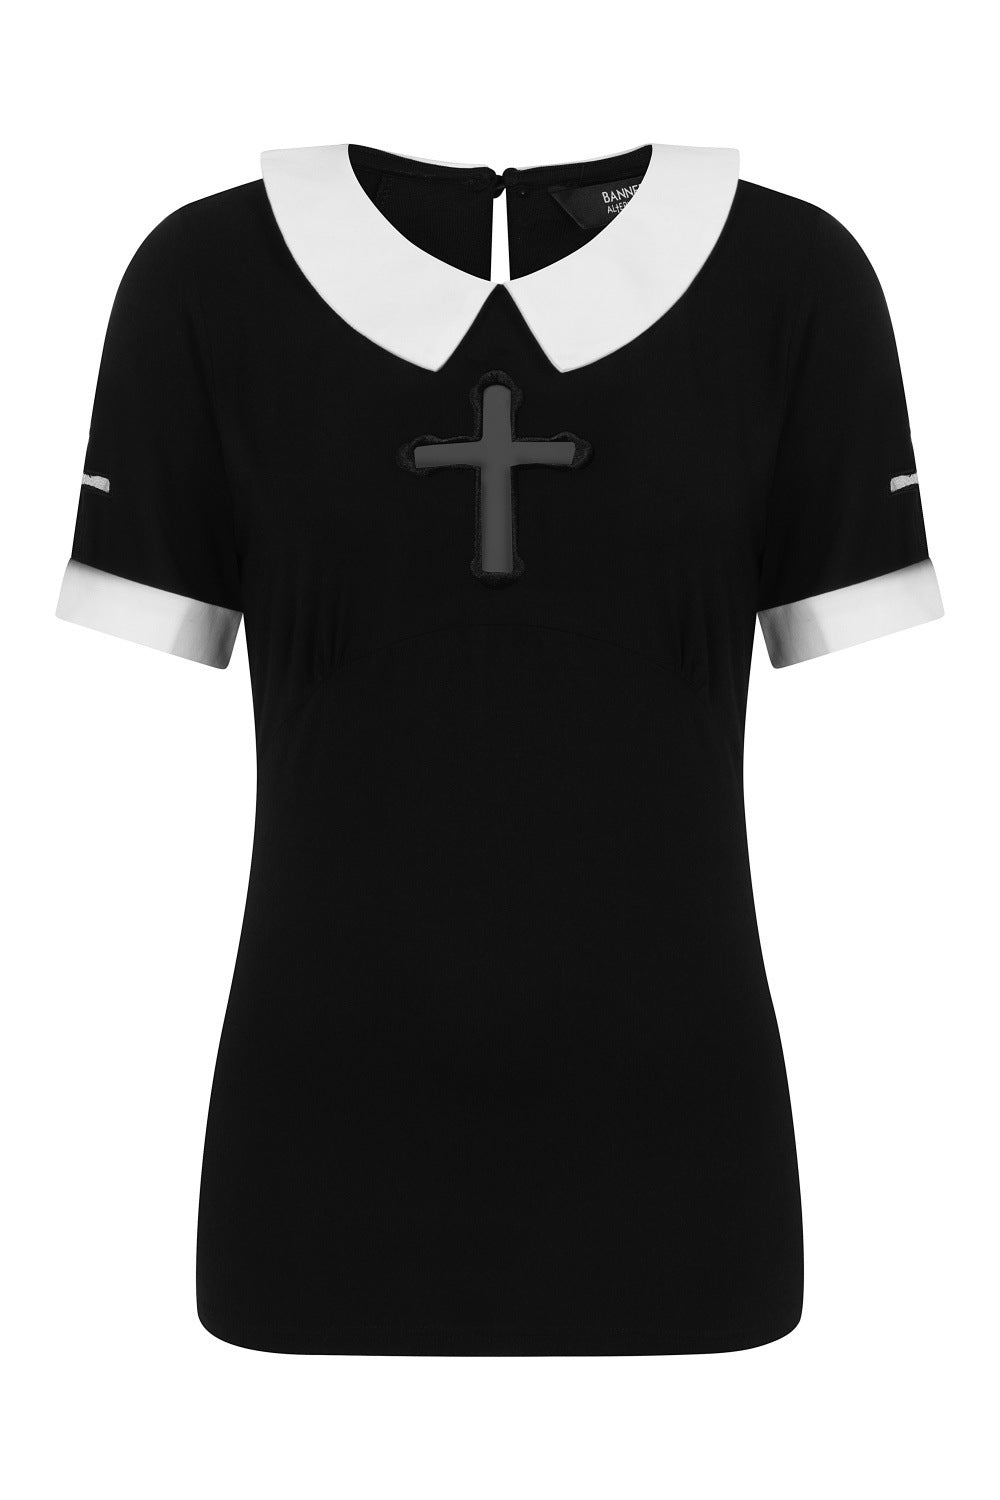 Black top with white sleeve cuff and collar. Featuring a cross mesh feature 